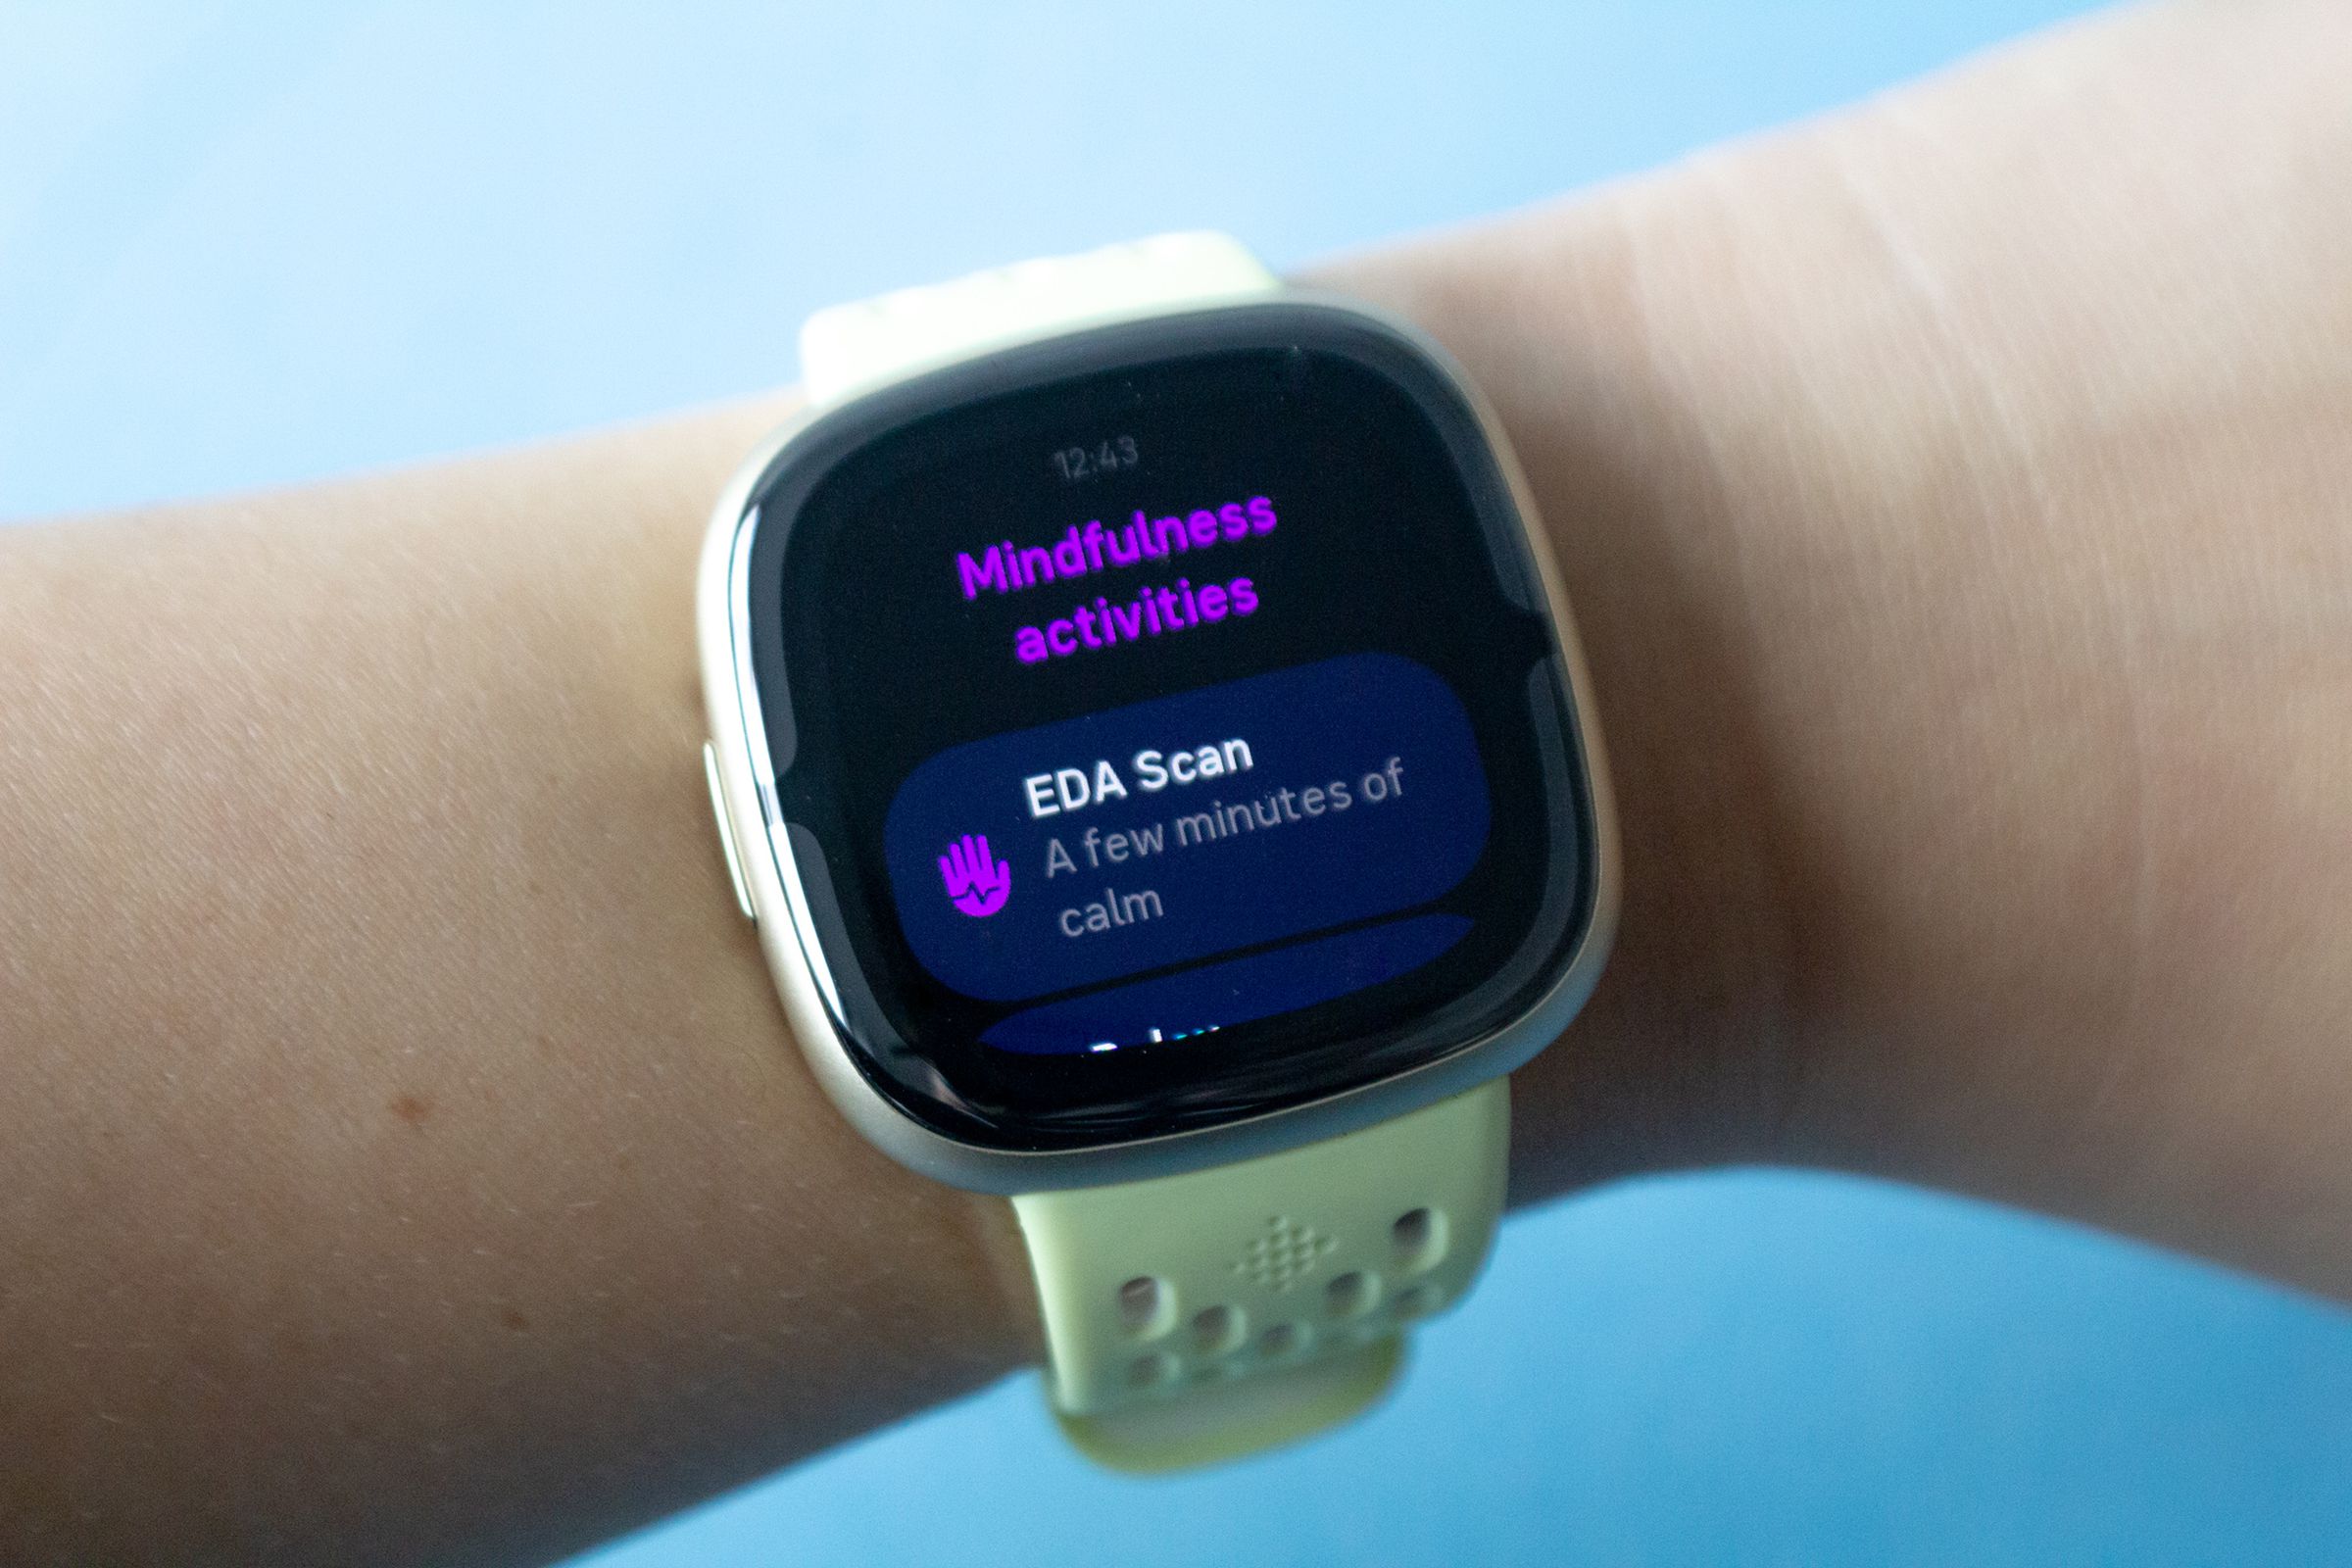 Picture of the “Mindfulness activities” screen on a wrist-worn Sense 2.